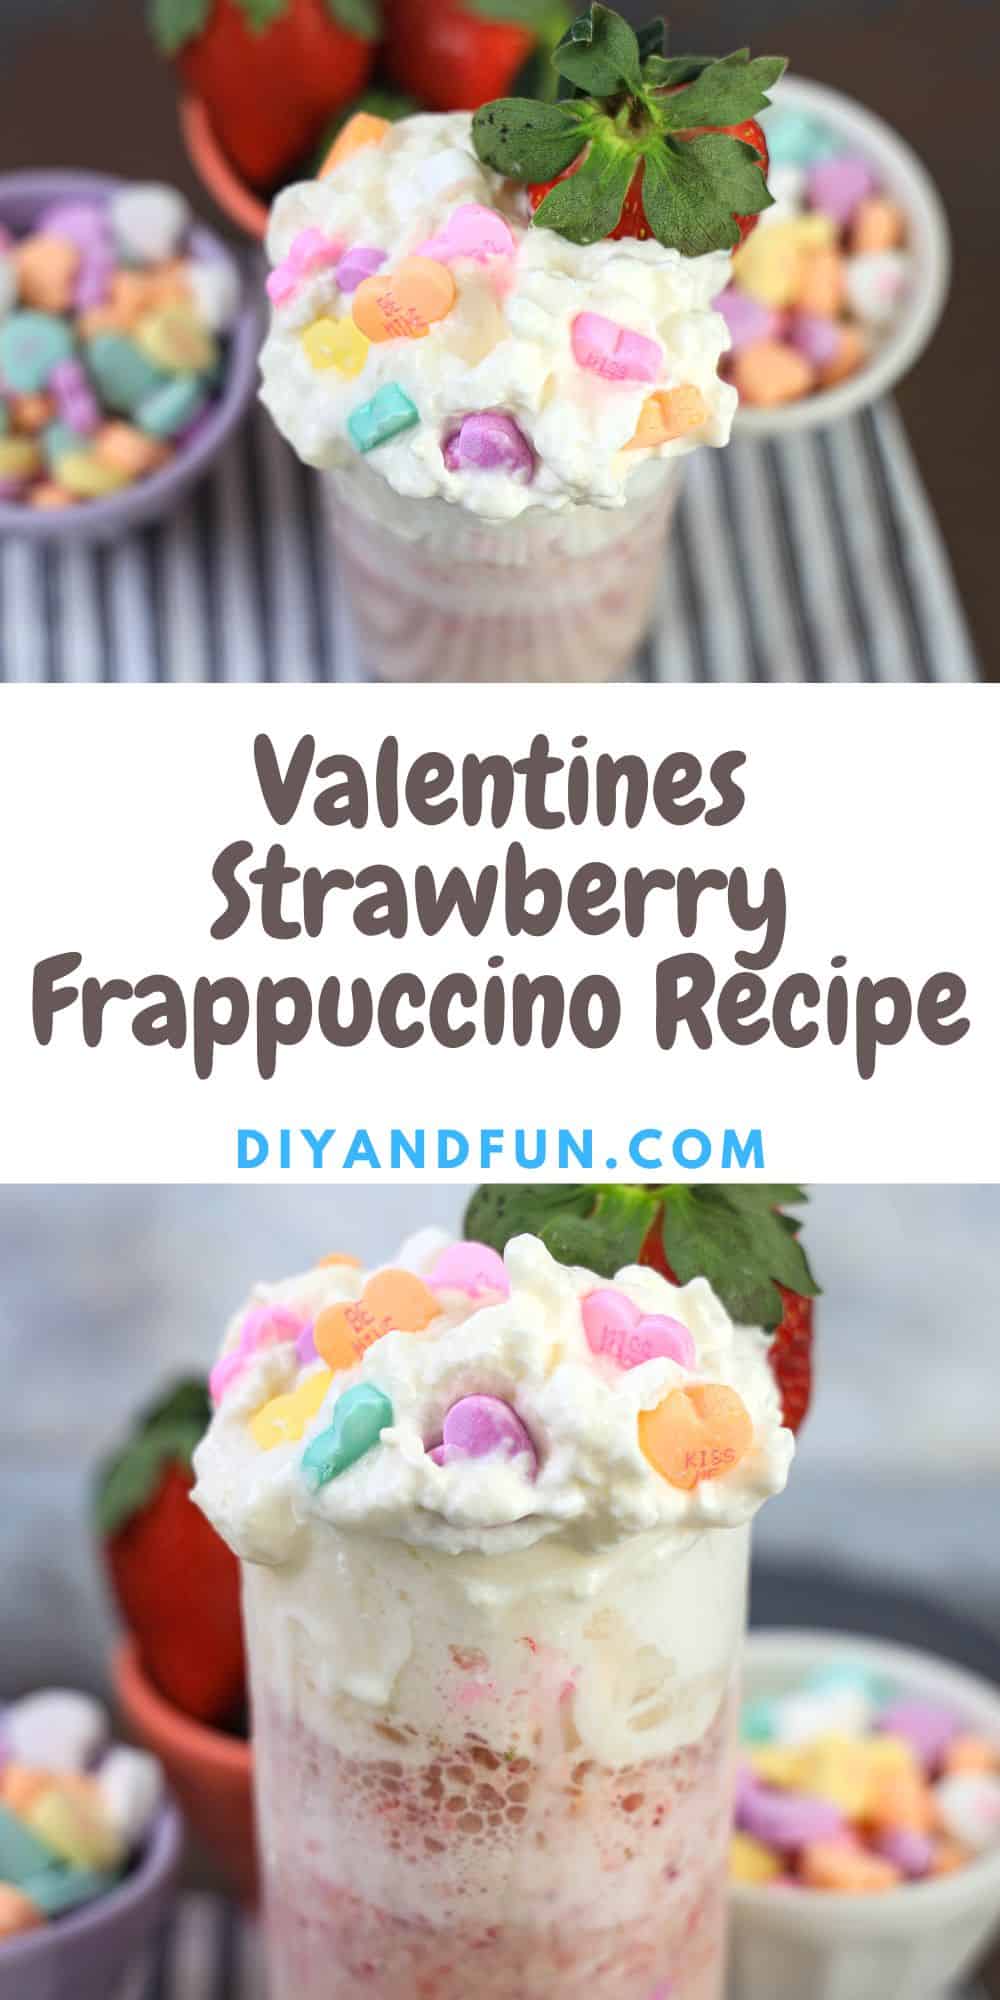 Copycat Starbucks Strawberry Frappuccino Recipe,  a simple and delicious beverage recipe made with fresh fruit. Perfect for  Valentines Day!